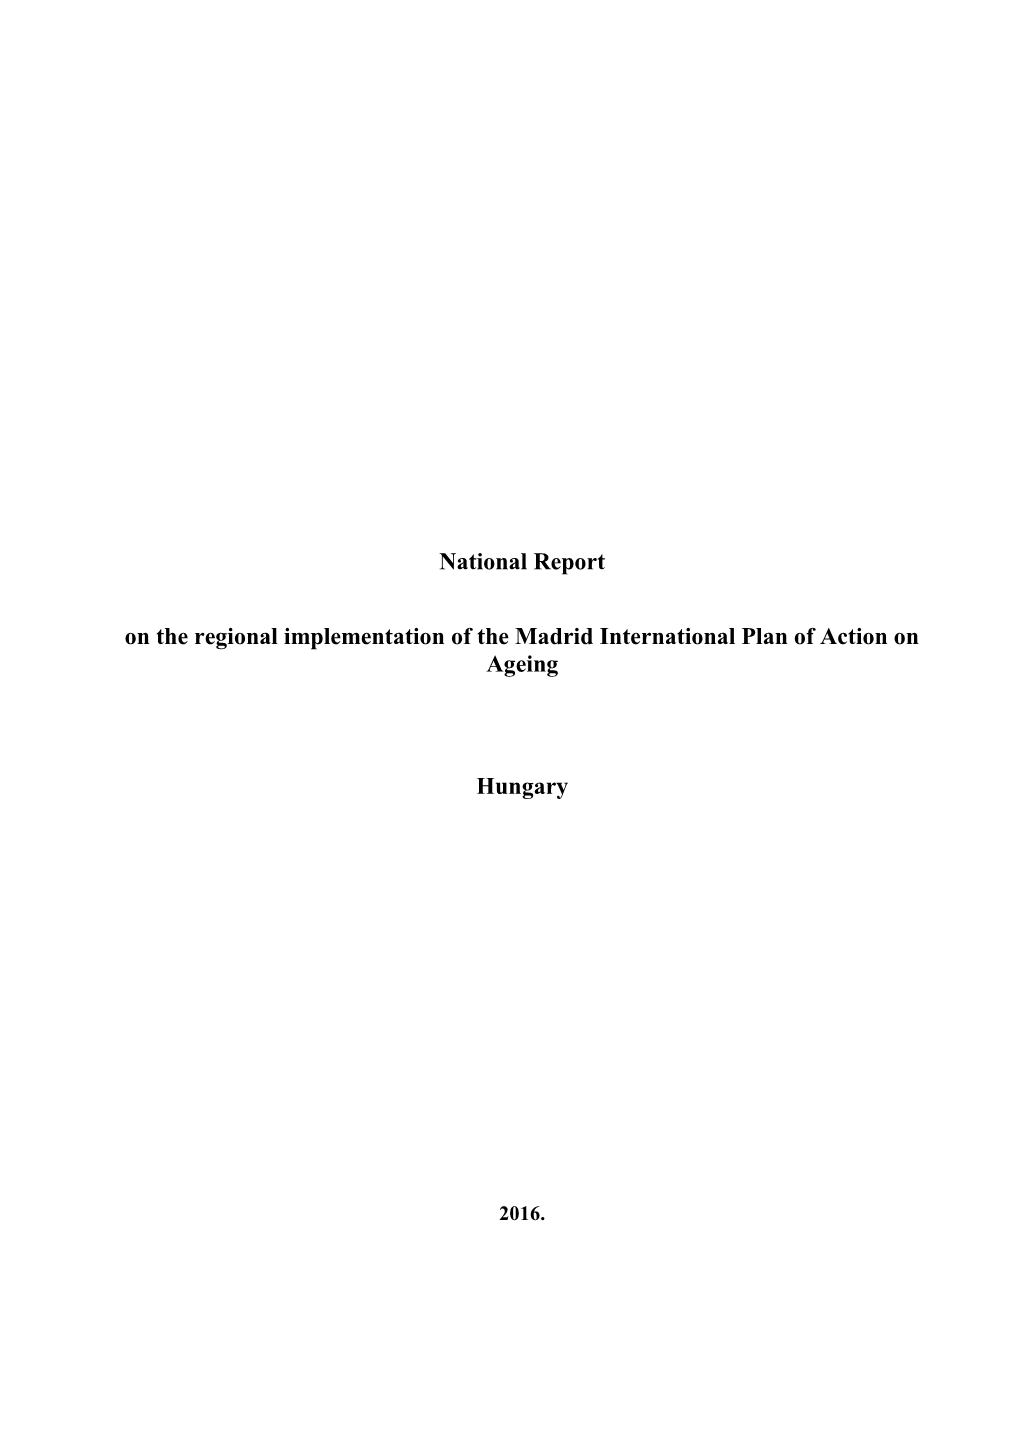 National Report on the Regional Implementation of the Madrid